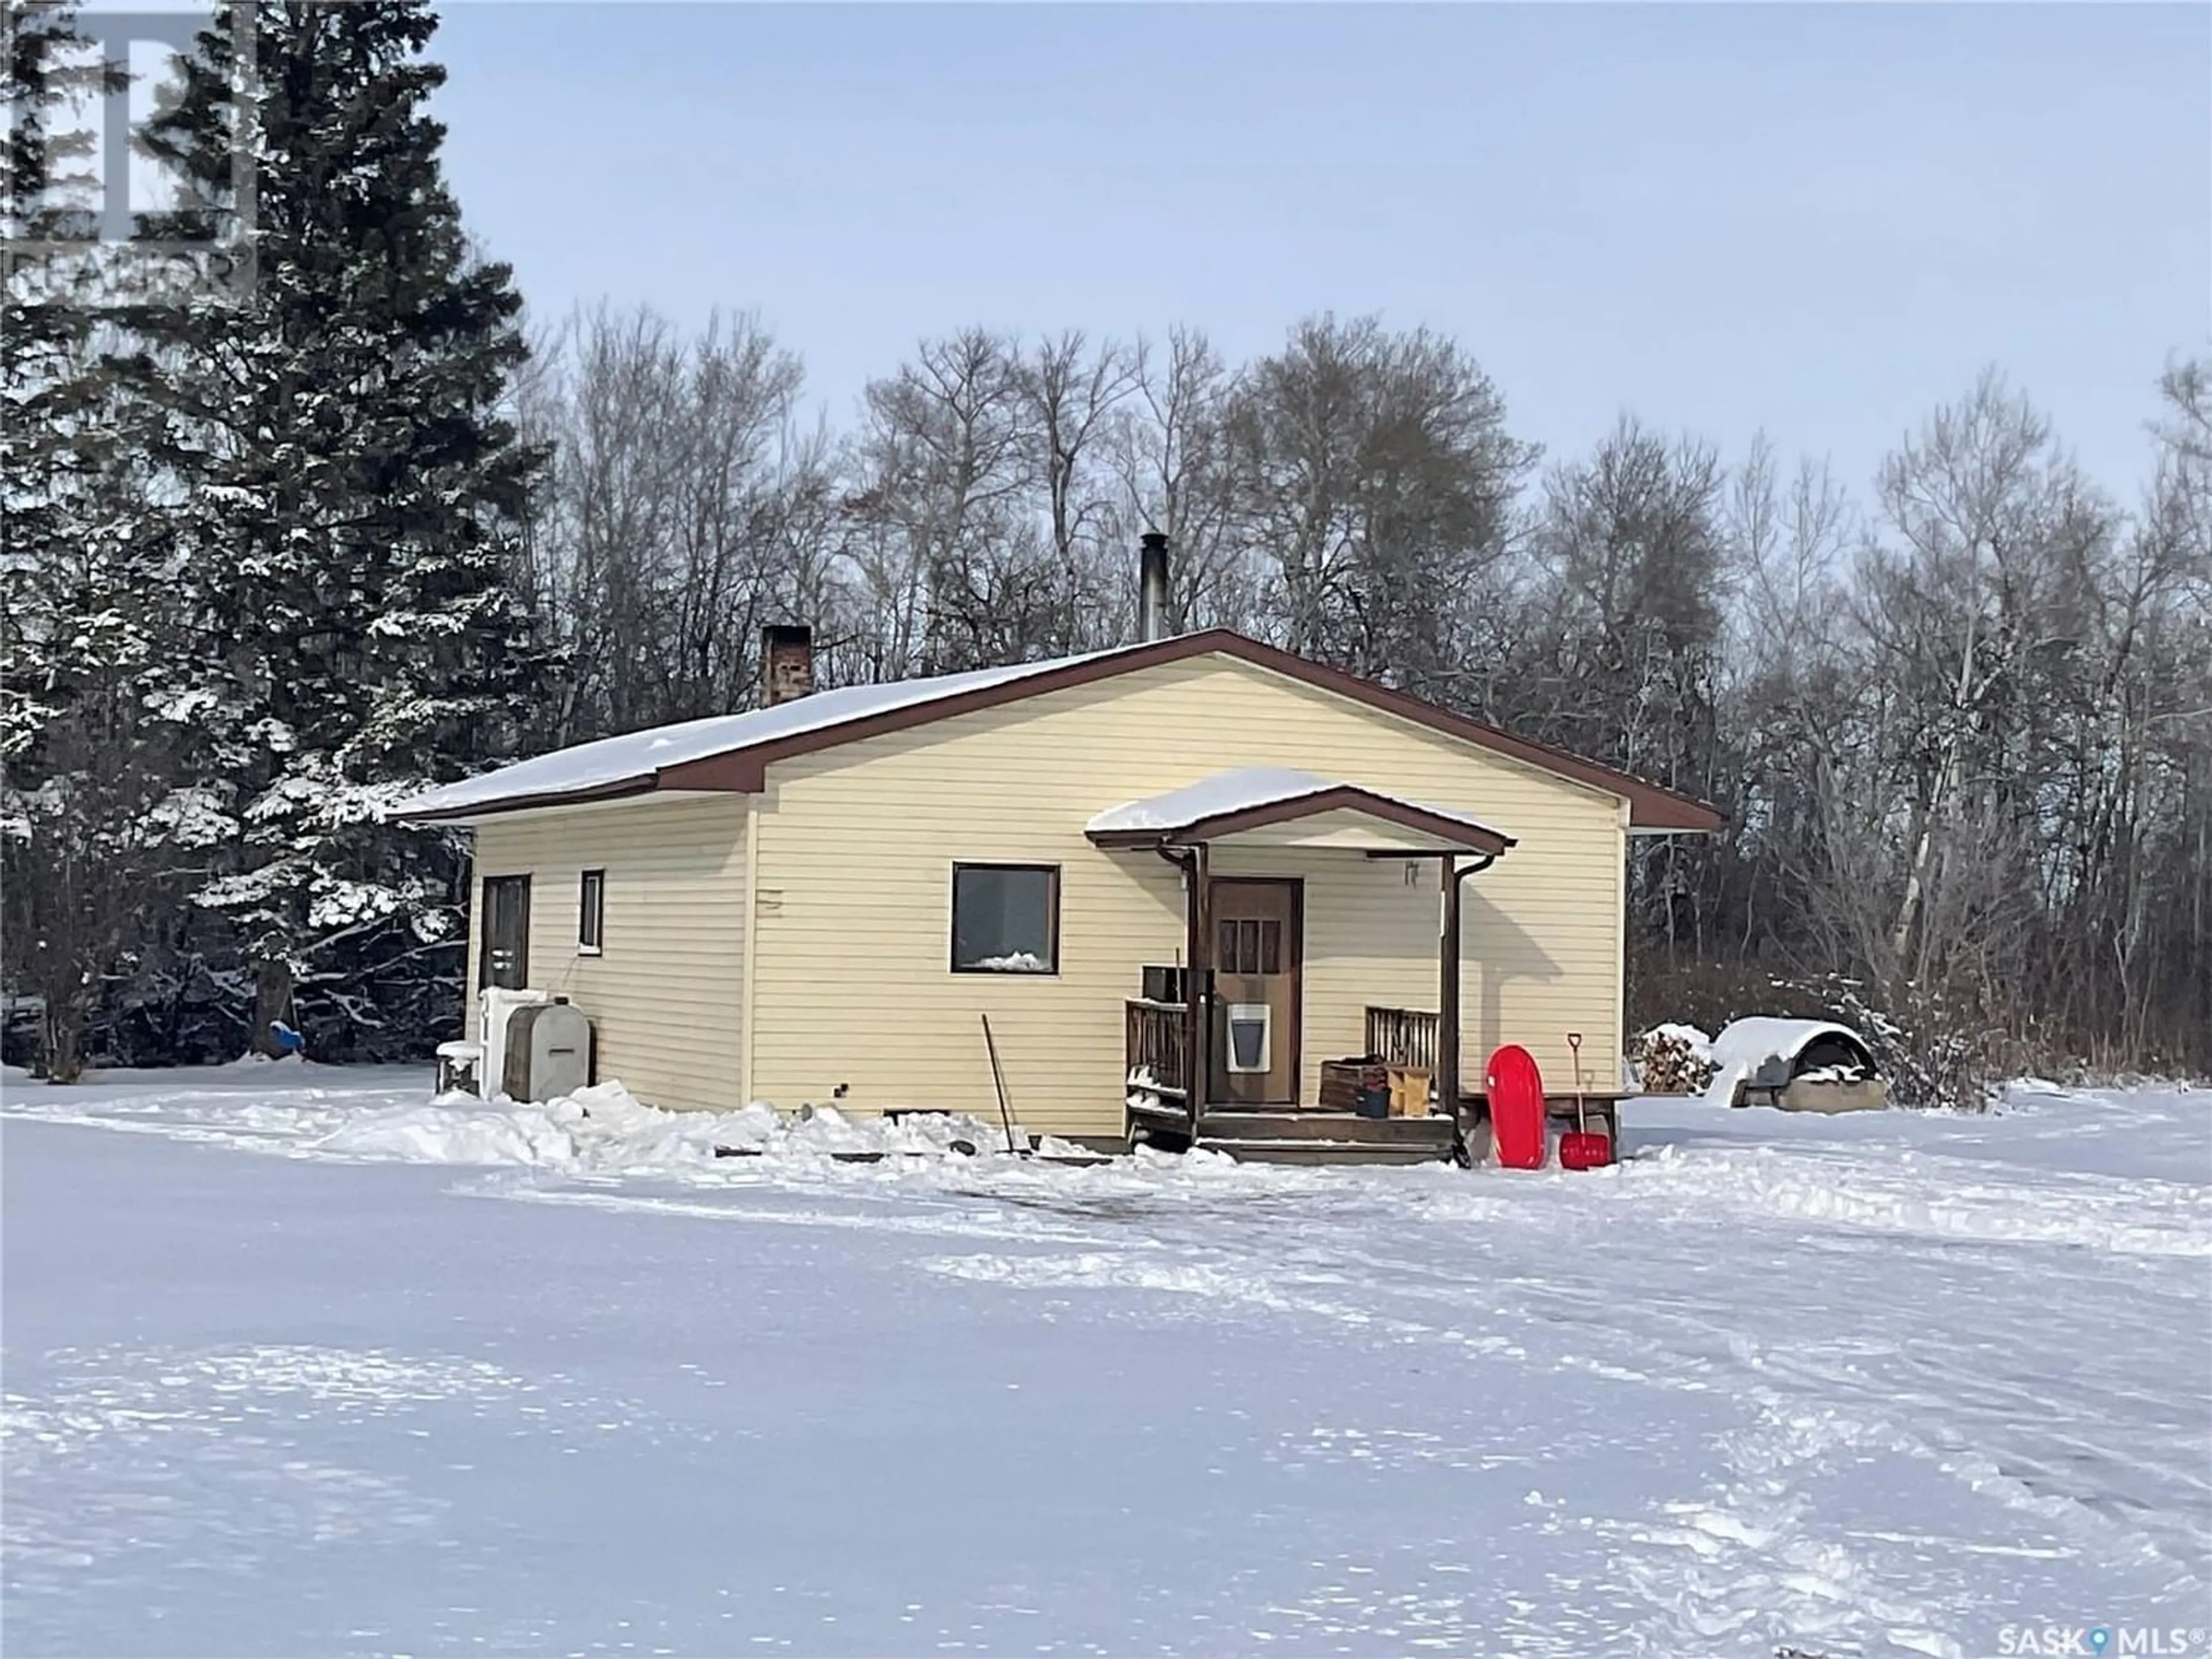 Home with unknown exterior material for Reimer Acreage Rosthern RM, Rosthern Rm No. 403 Saskatchewan S0K3R0